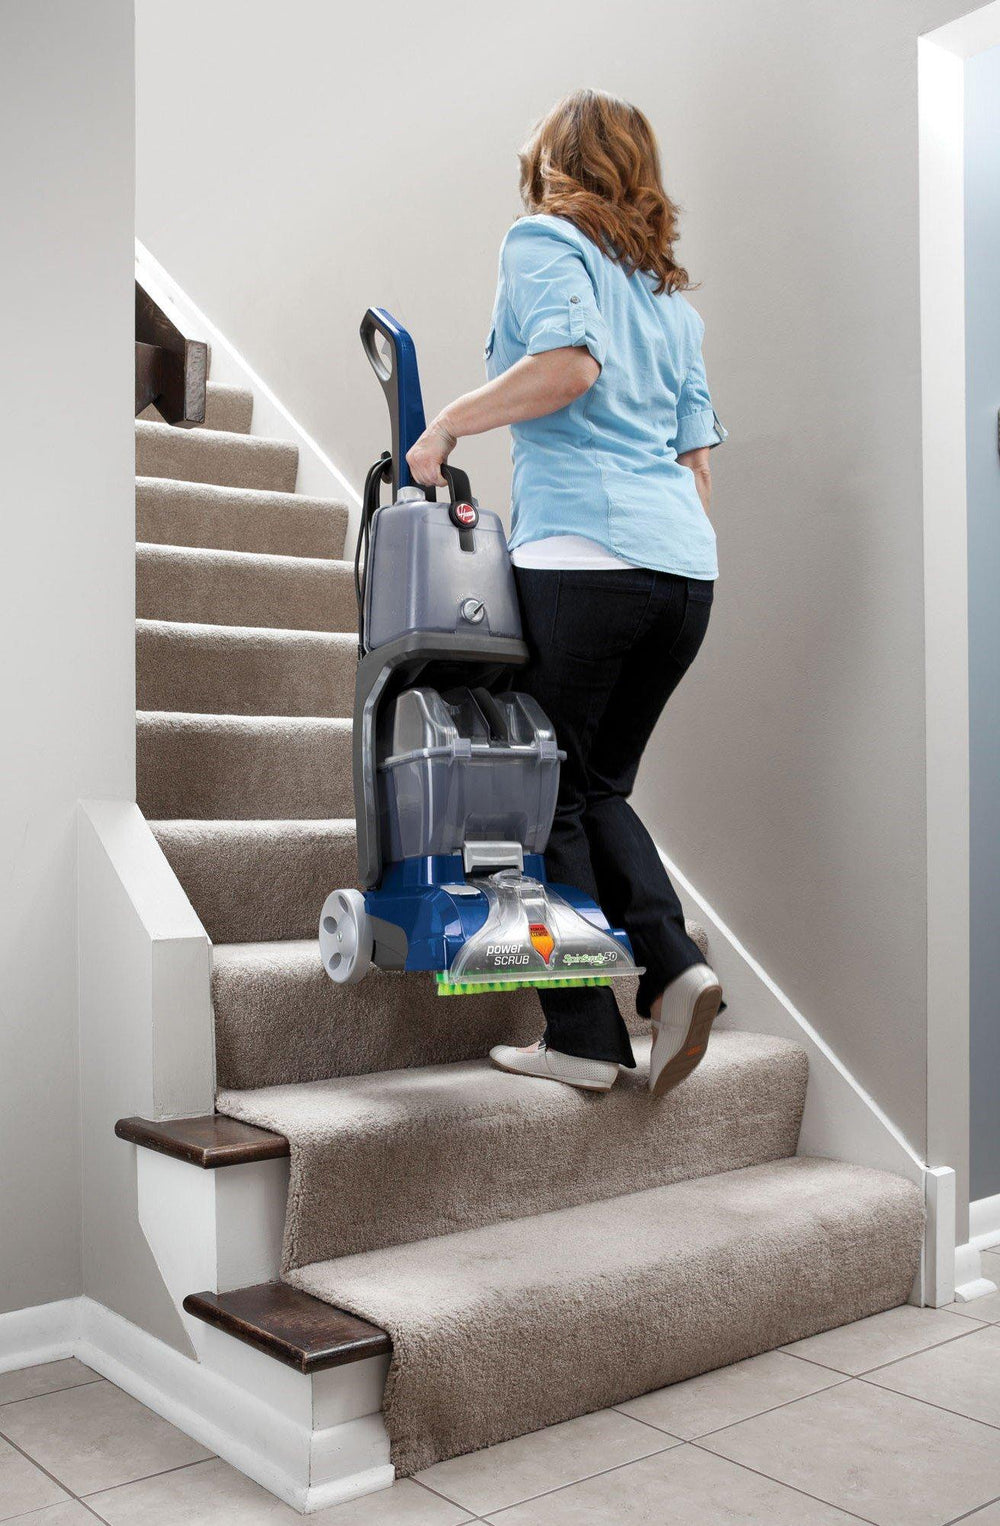 Dry carpet Cleaning with Carpetlife powder and cleaning machine